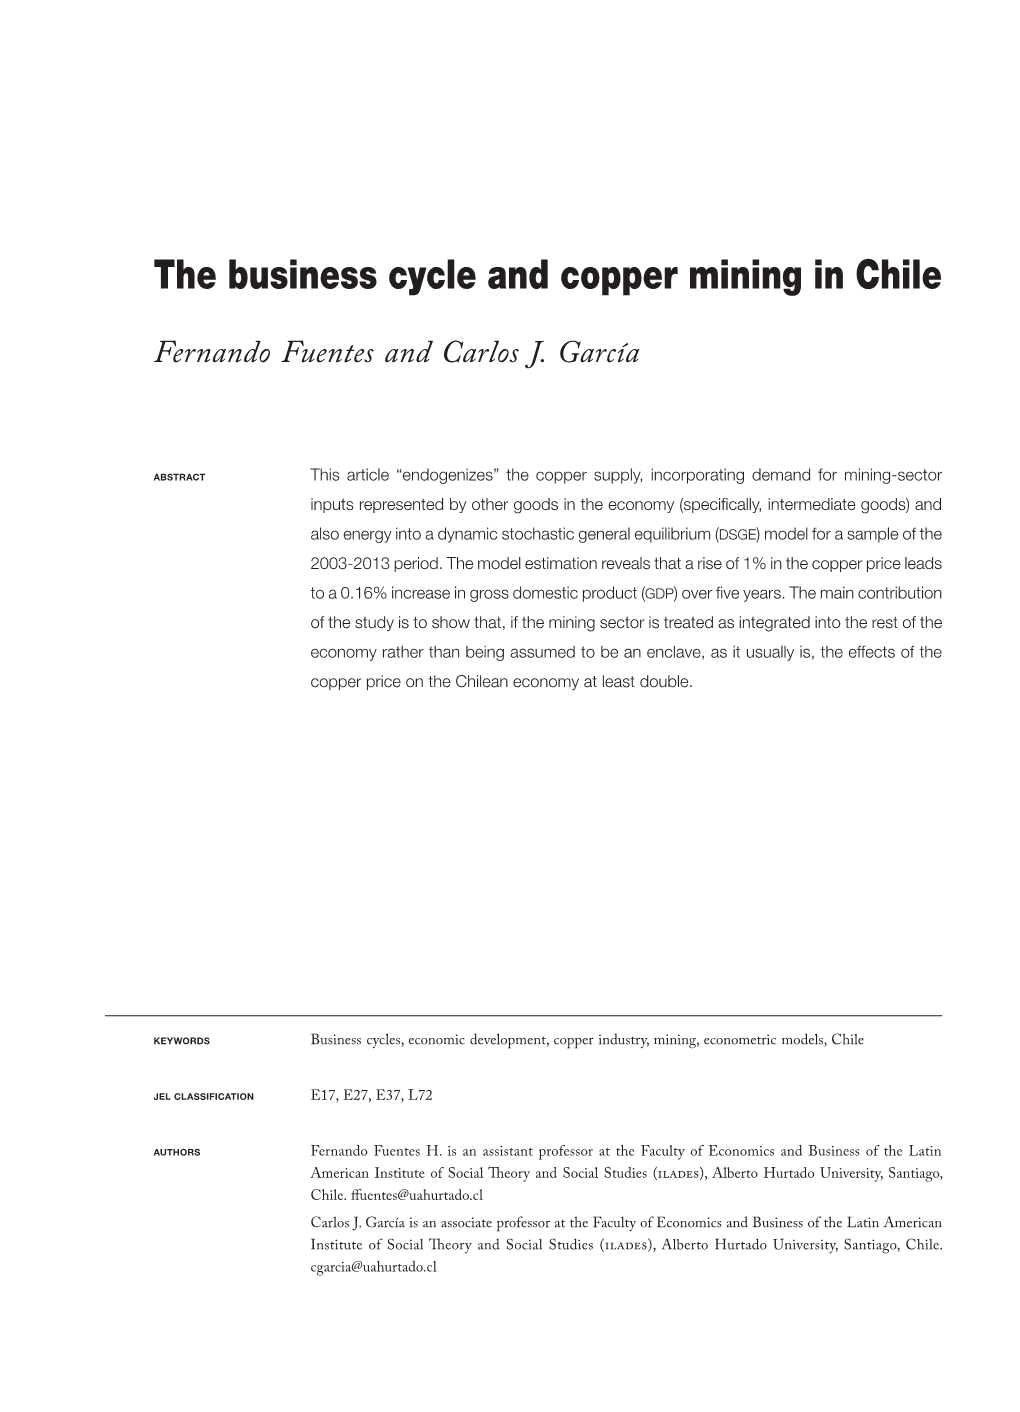 The Business Cycle and Copper Mining in Chile